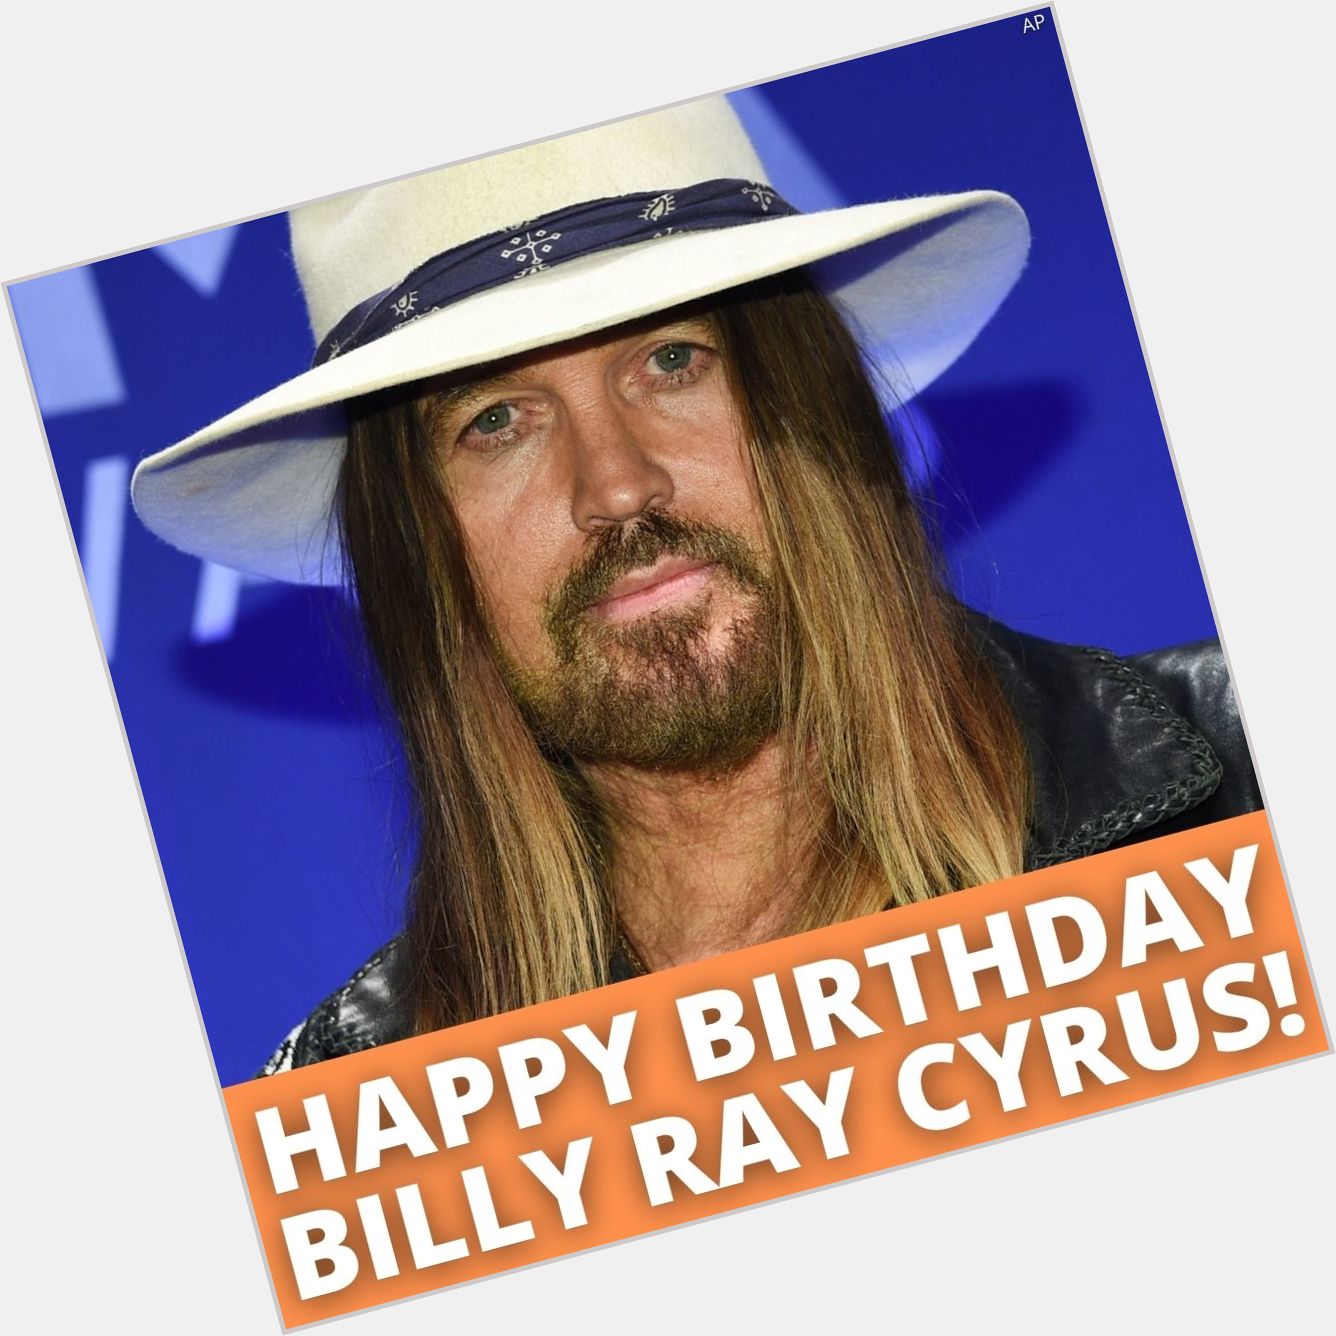 HAPPY BIRTHDAY Billy Ray Cyrus! The Musician turns 60 years old today! 